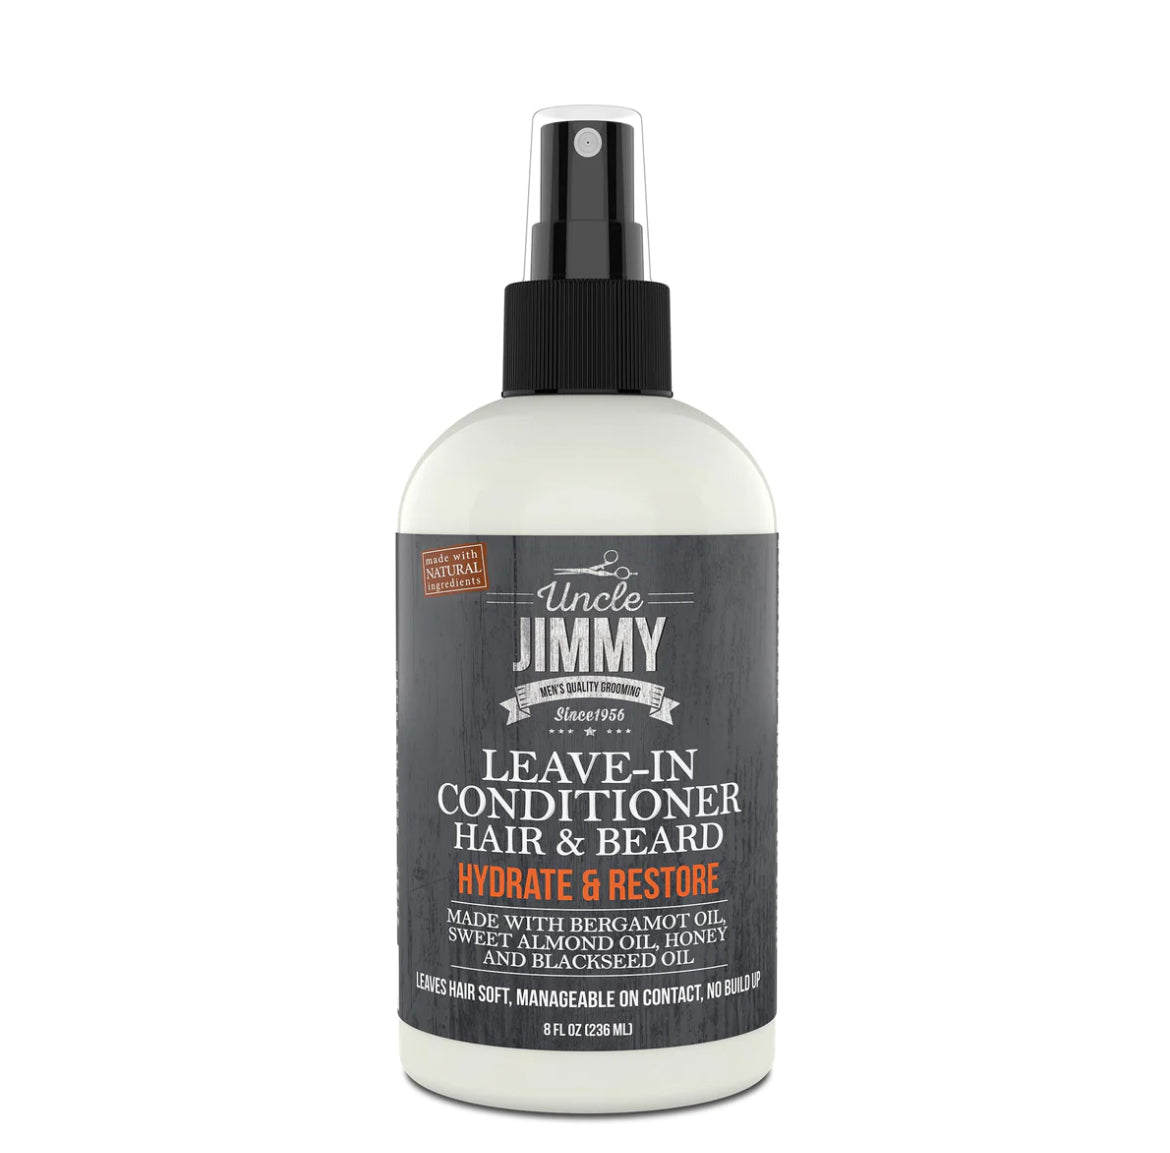 UNCLE JIMMY HAIR & BEARD LEAVE-IN-CONDITIONER